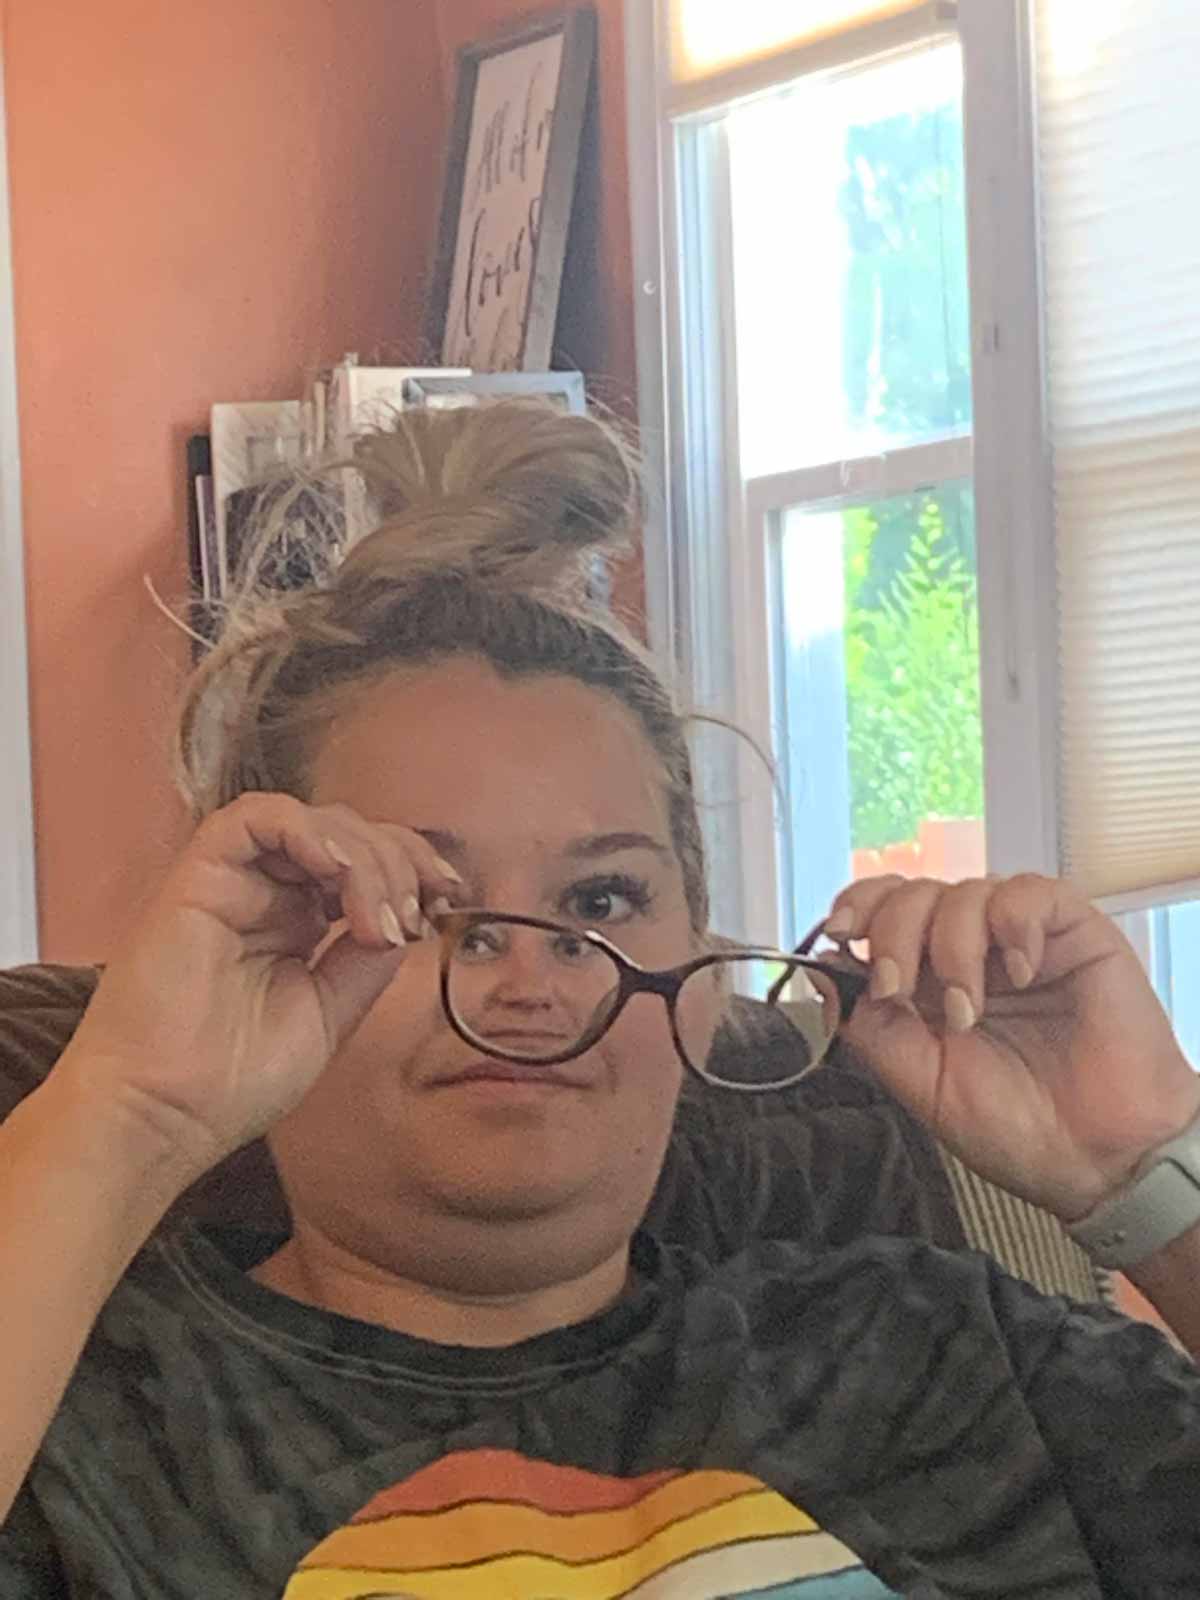 Funny photo of a woman with her glasses in front of her face so her head looks tiny in one of the lenses